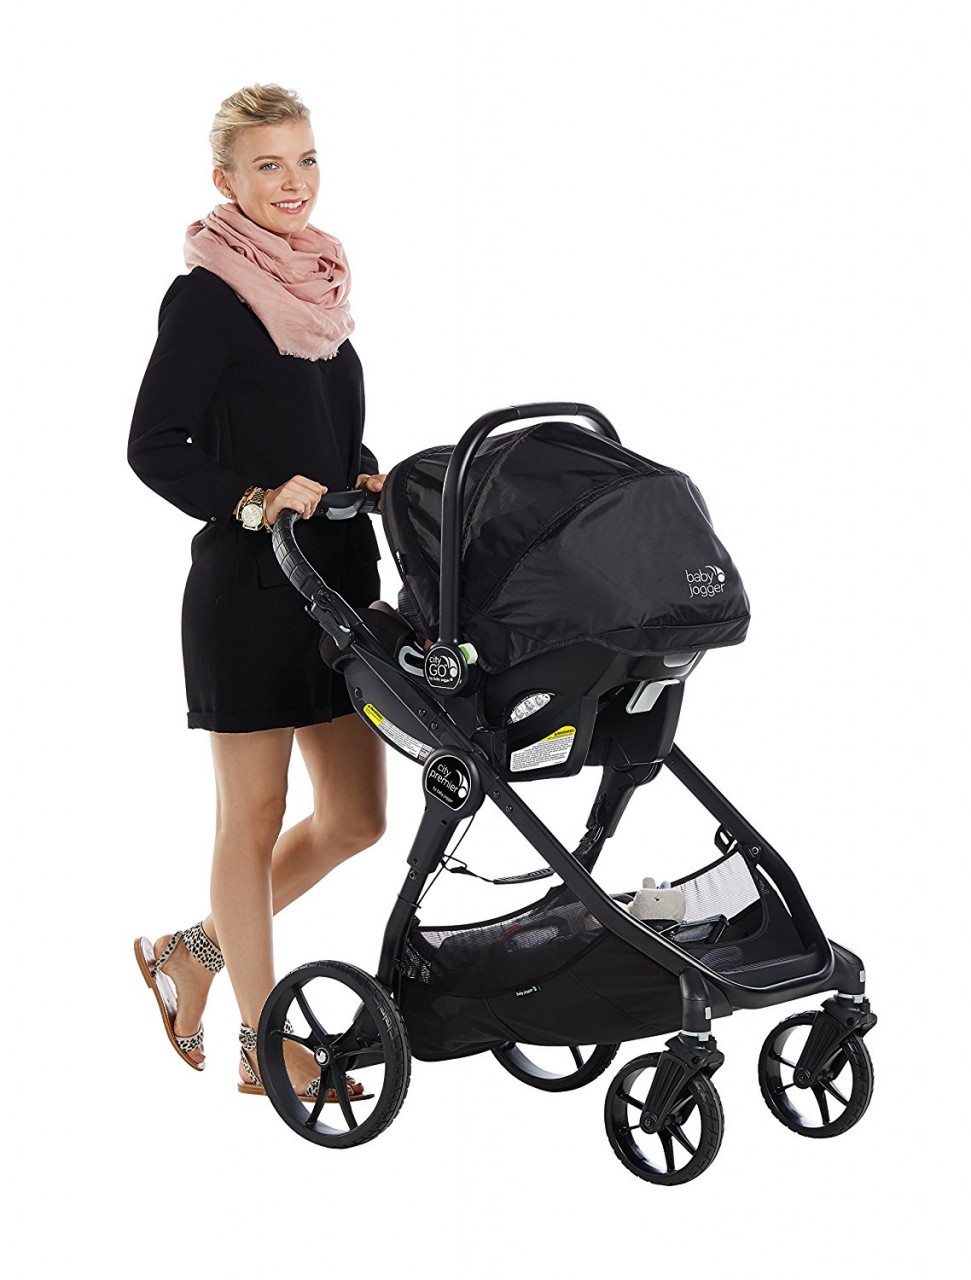 Travel System Review: Baby Jogger City GO Infant Seat and City Premier Stroller – CarseatBlog